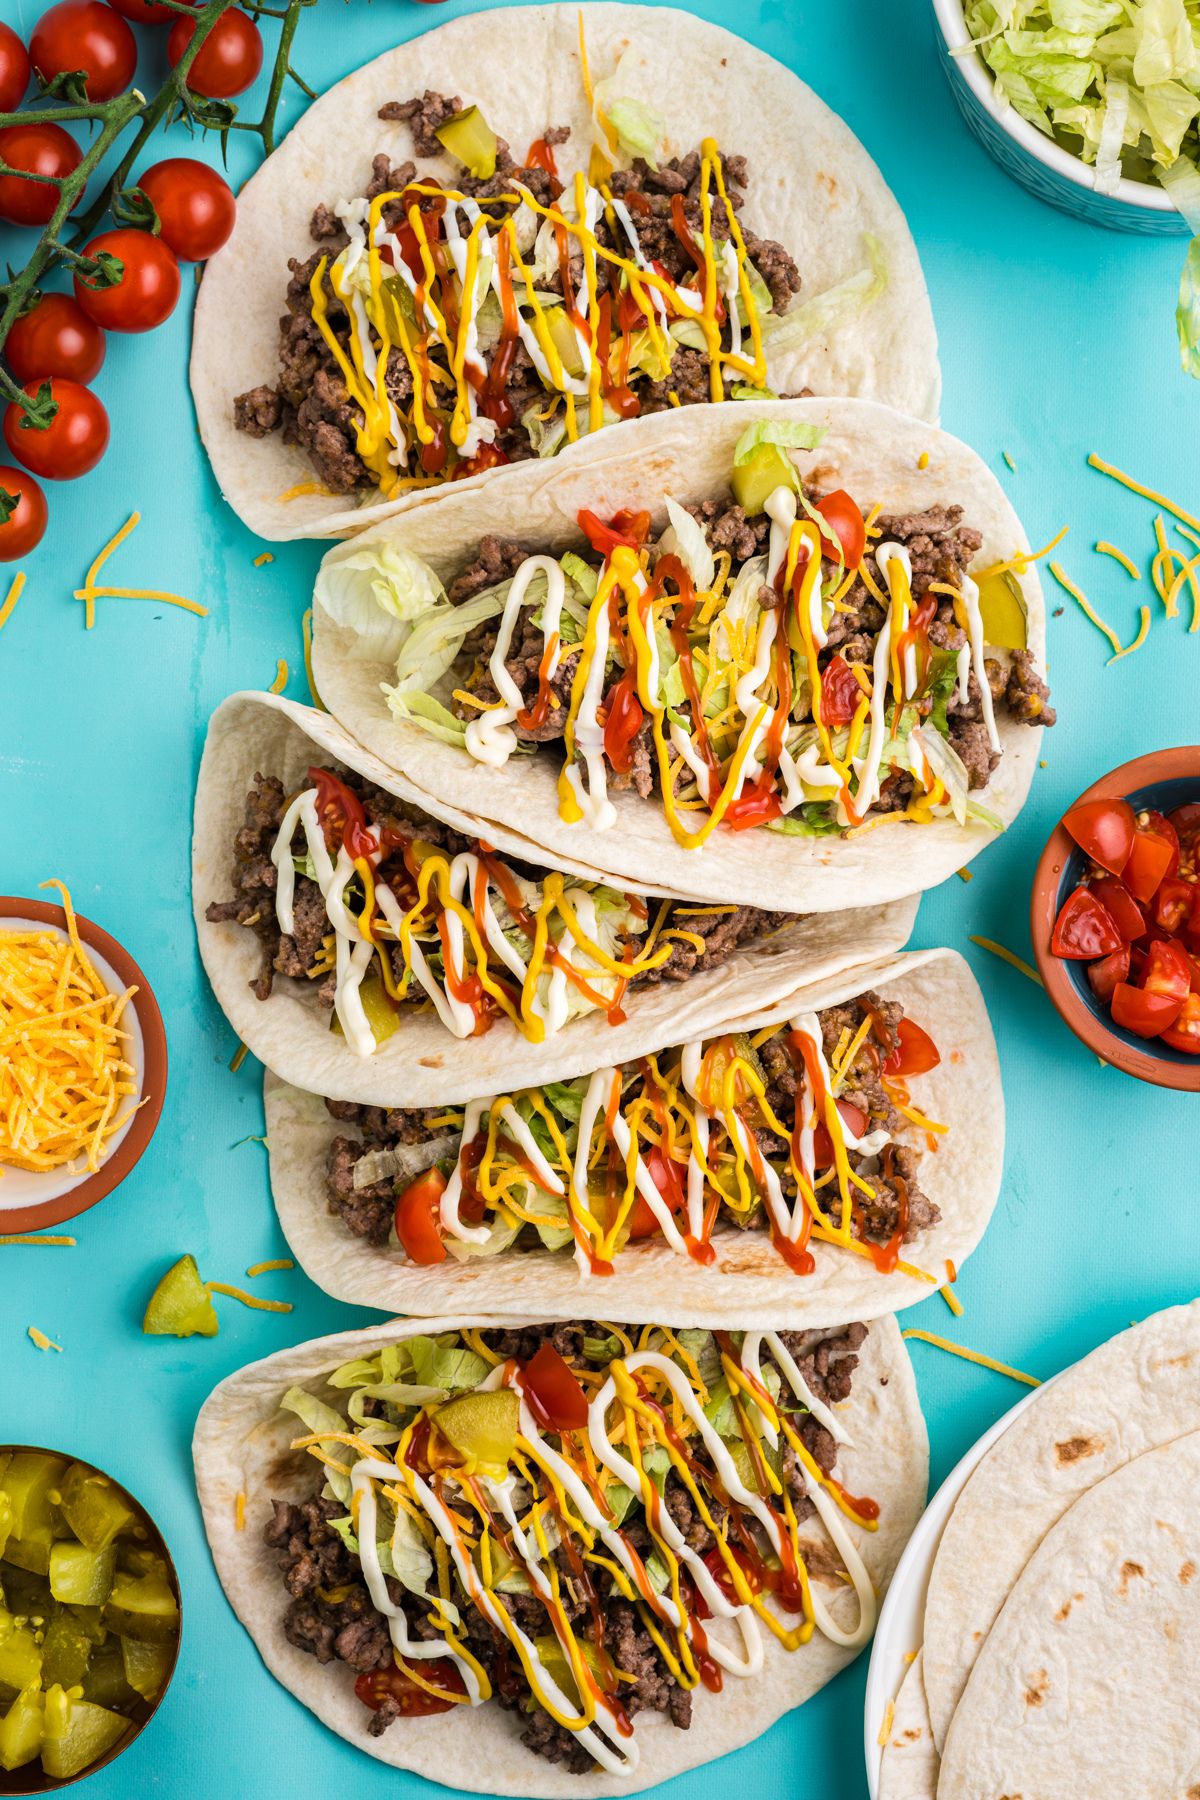 Cheeseburger tacos on the table with bowls of condiments surrounding them.